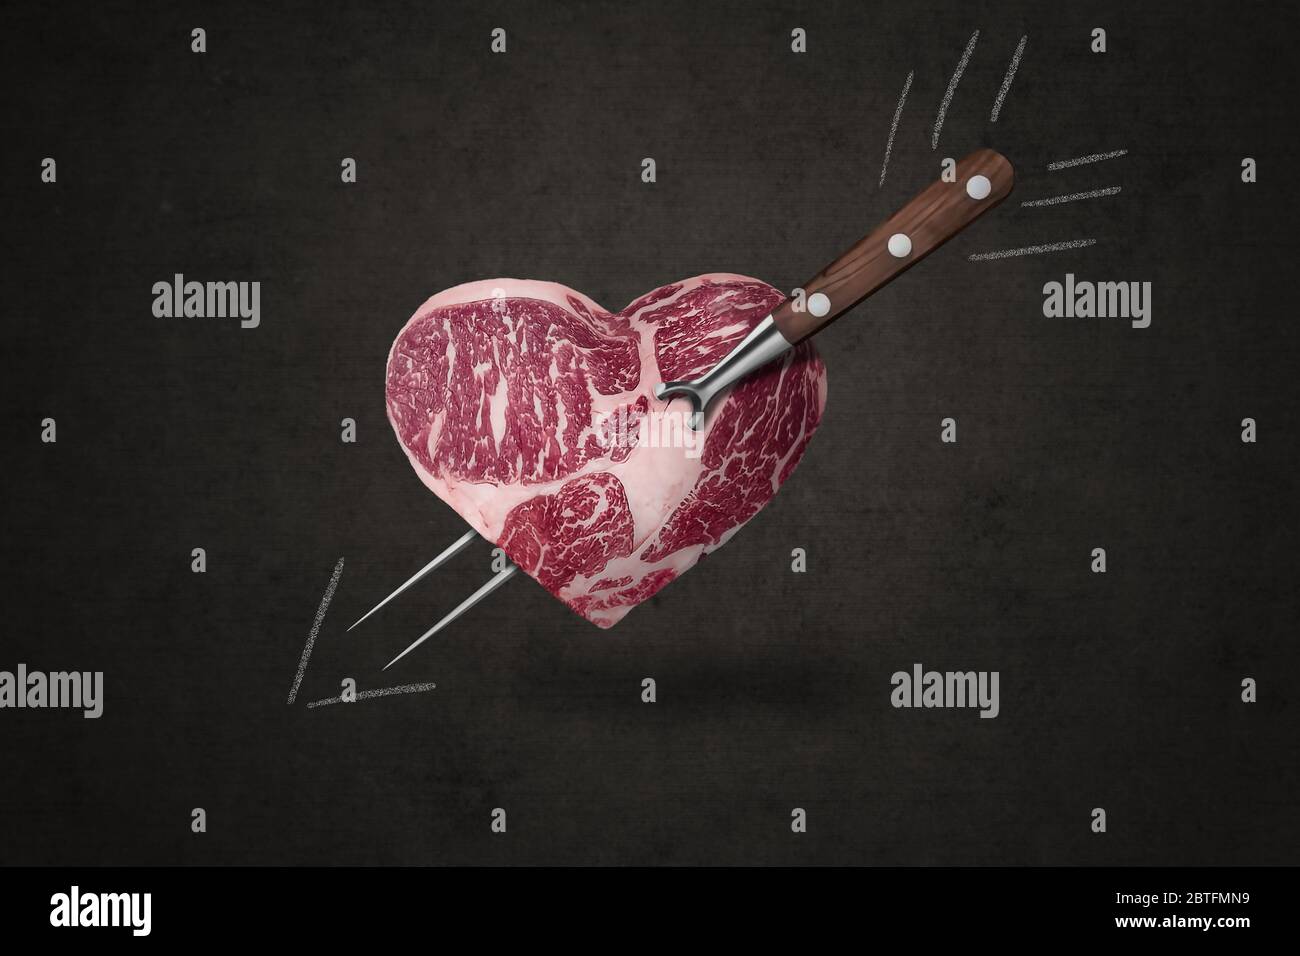 Heart shaped meat with drawn arrow, concept of love for meat and grilling, passion for grilled meat, symbol of love and cupid, illustration Stock Photo